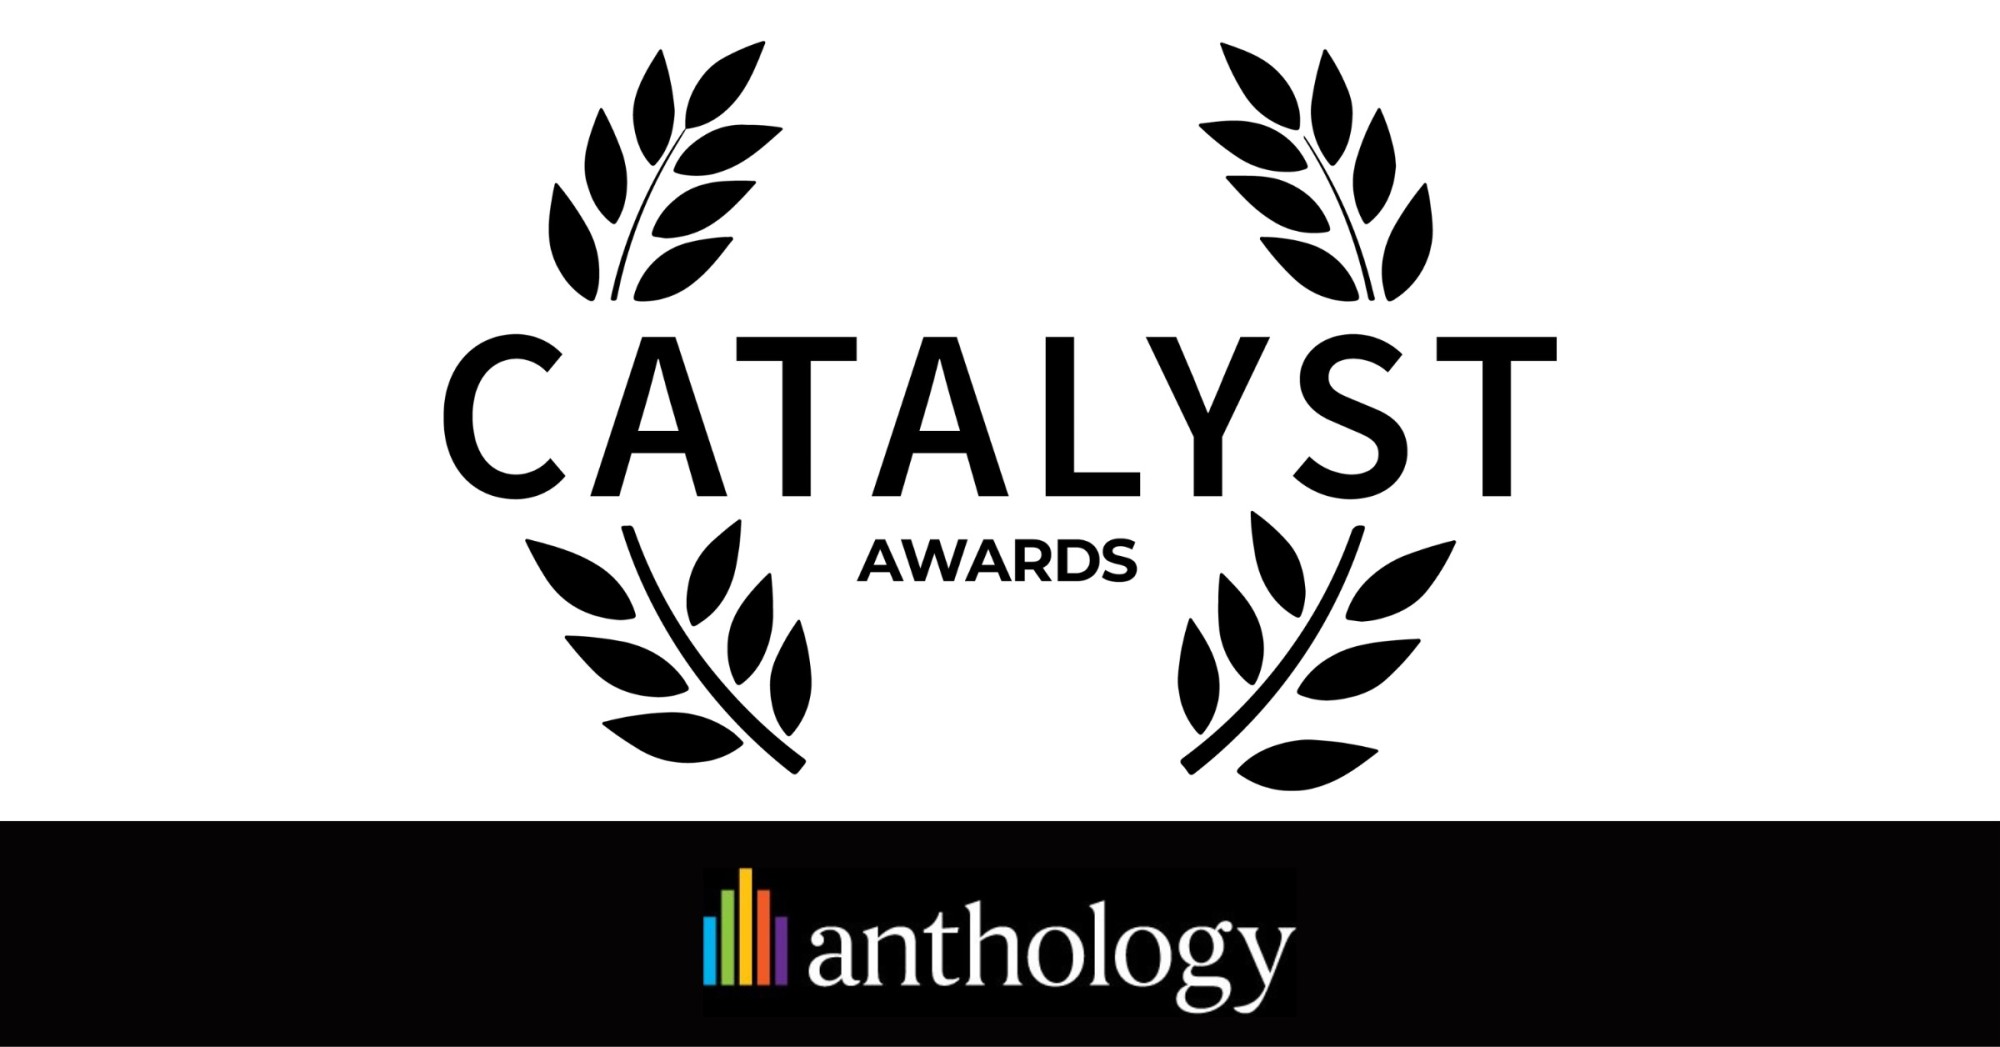 Image with the Catalyst Awards logo on a white background and below the Anthology. 